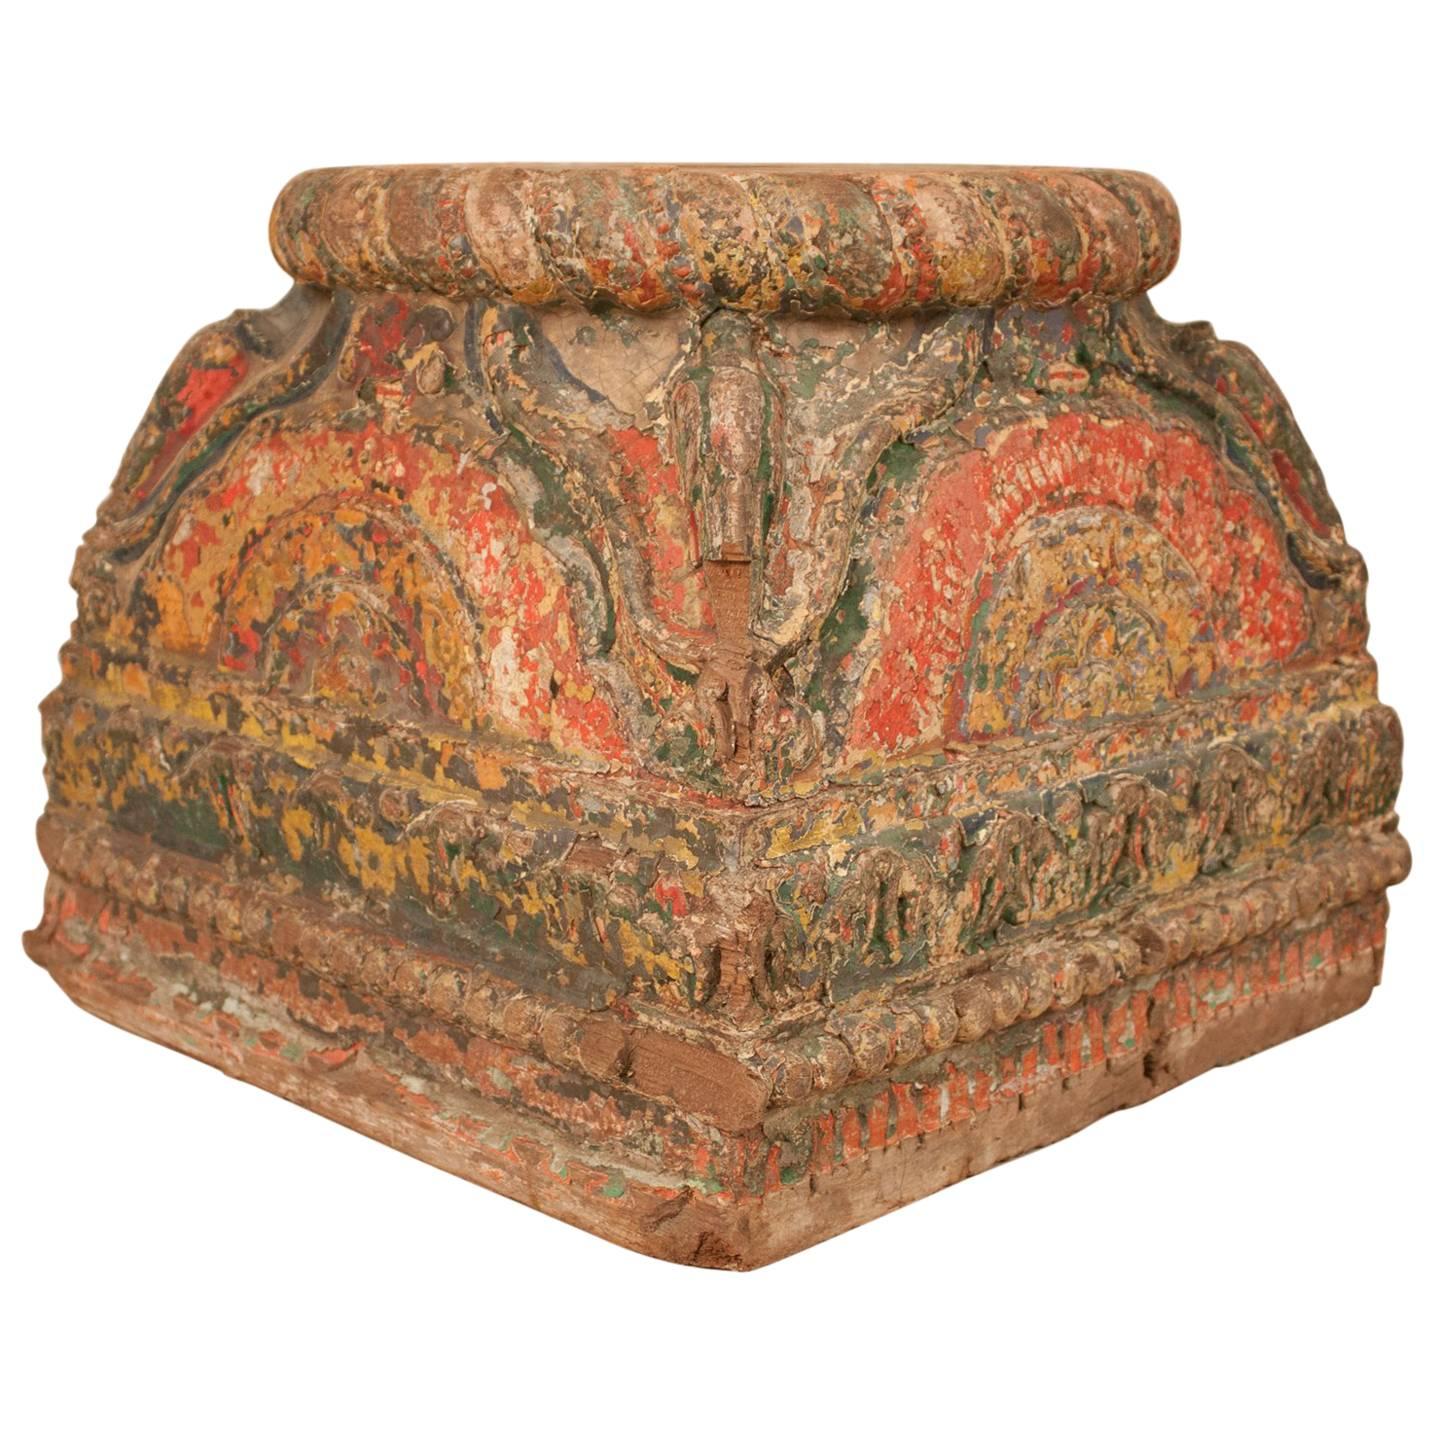 A set of three 19th century column supports that most likely graced the courtyard of a haveli or mansion in Gujarat, India. These exceptional circa 1830 bases are carved from teak wood and have many layers of old paint. Note that small repairs were